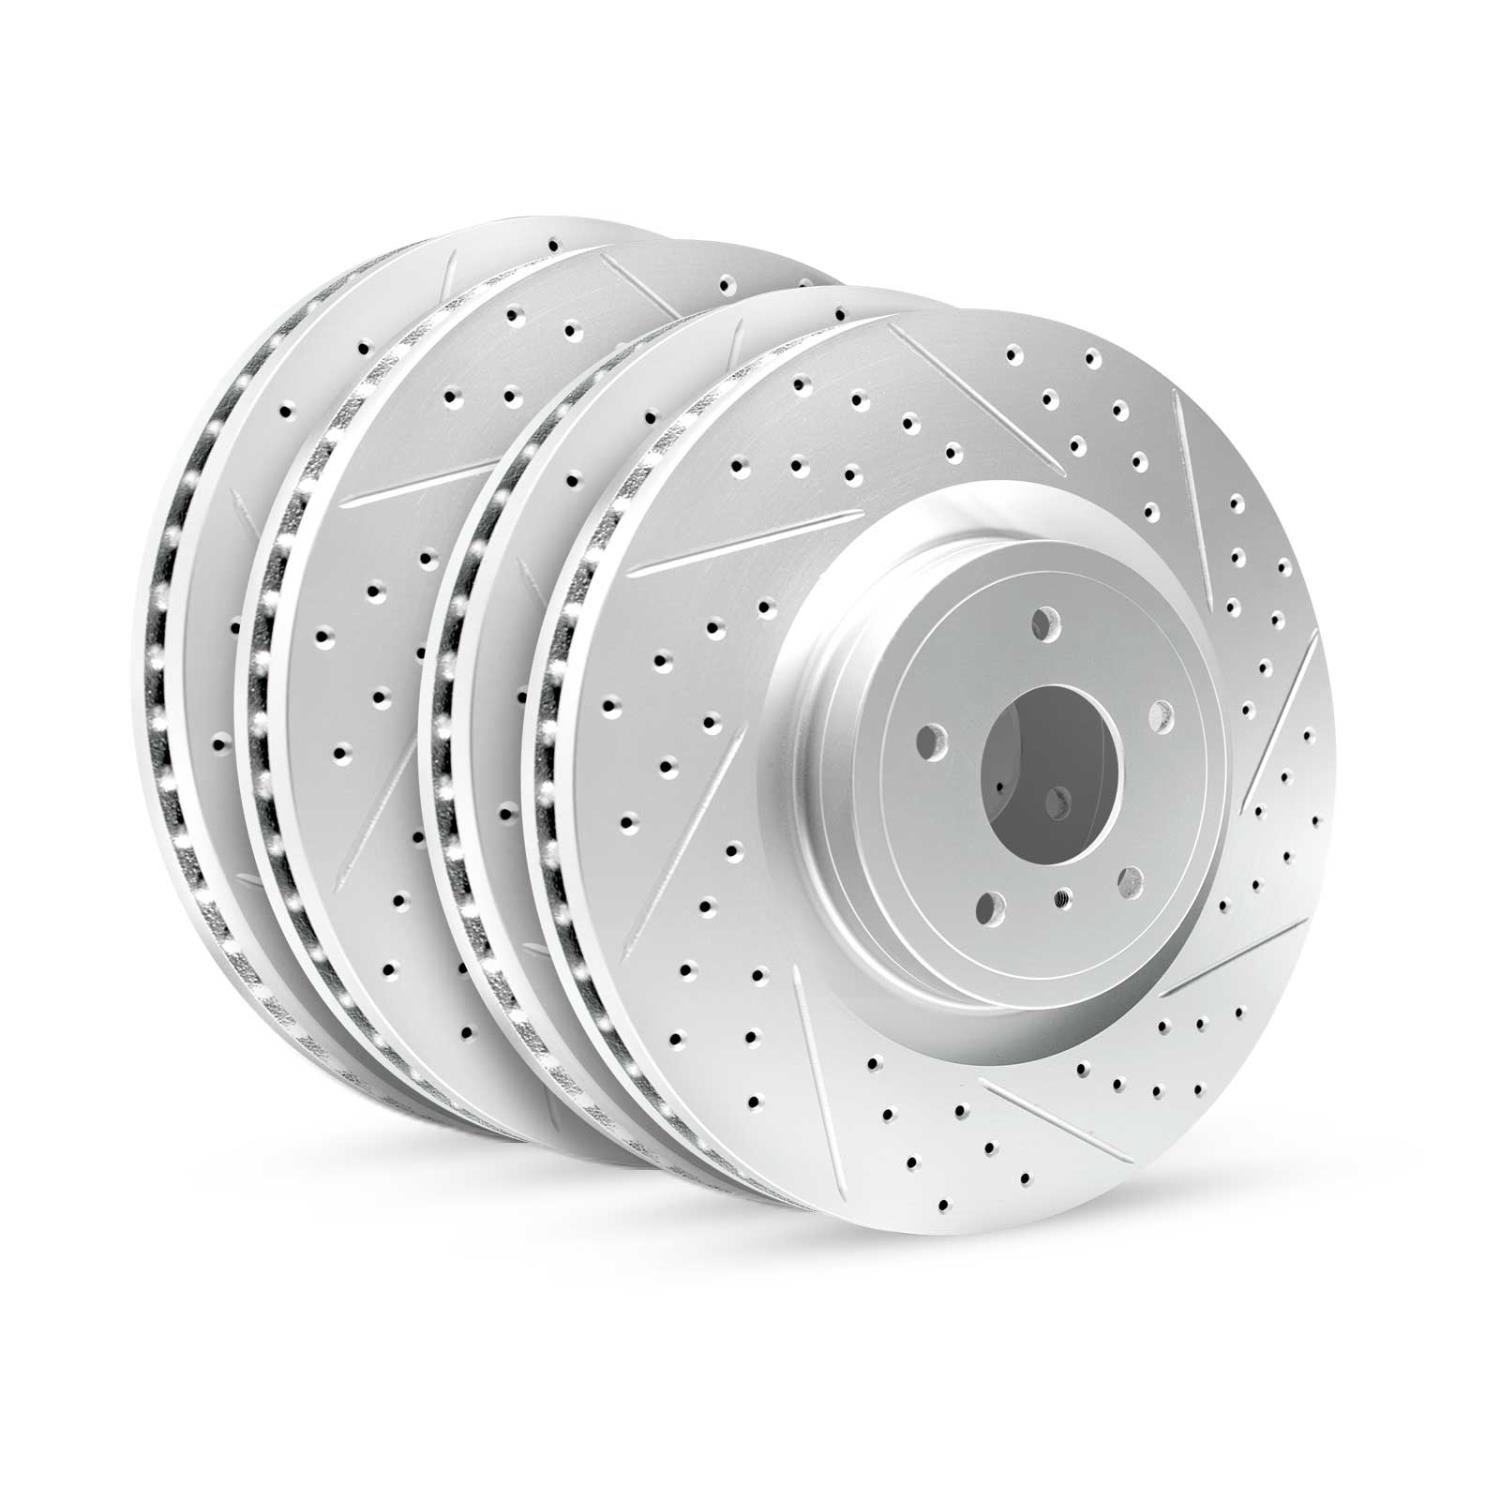 GEO-Carbon Drilled/Slotted Rotors, 1997-2001 Acura/Honda, Position: Front/Rear